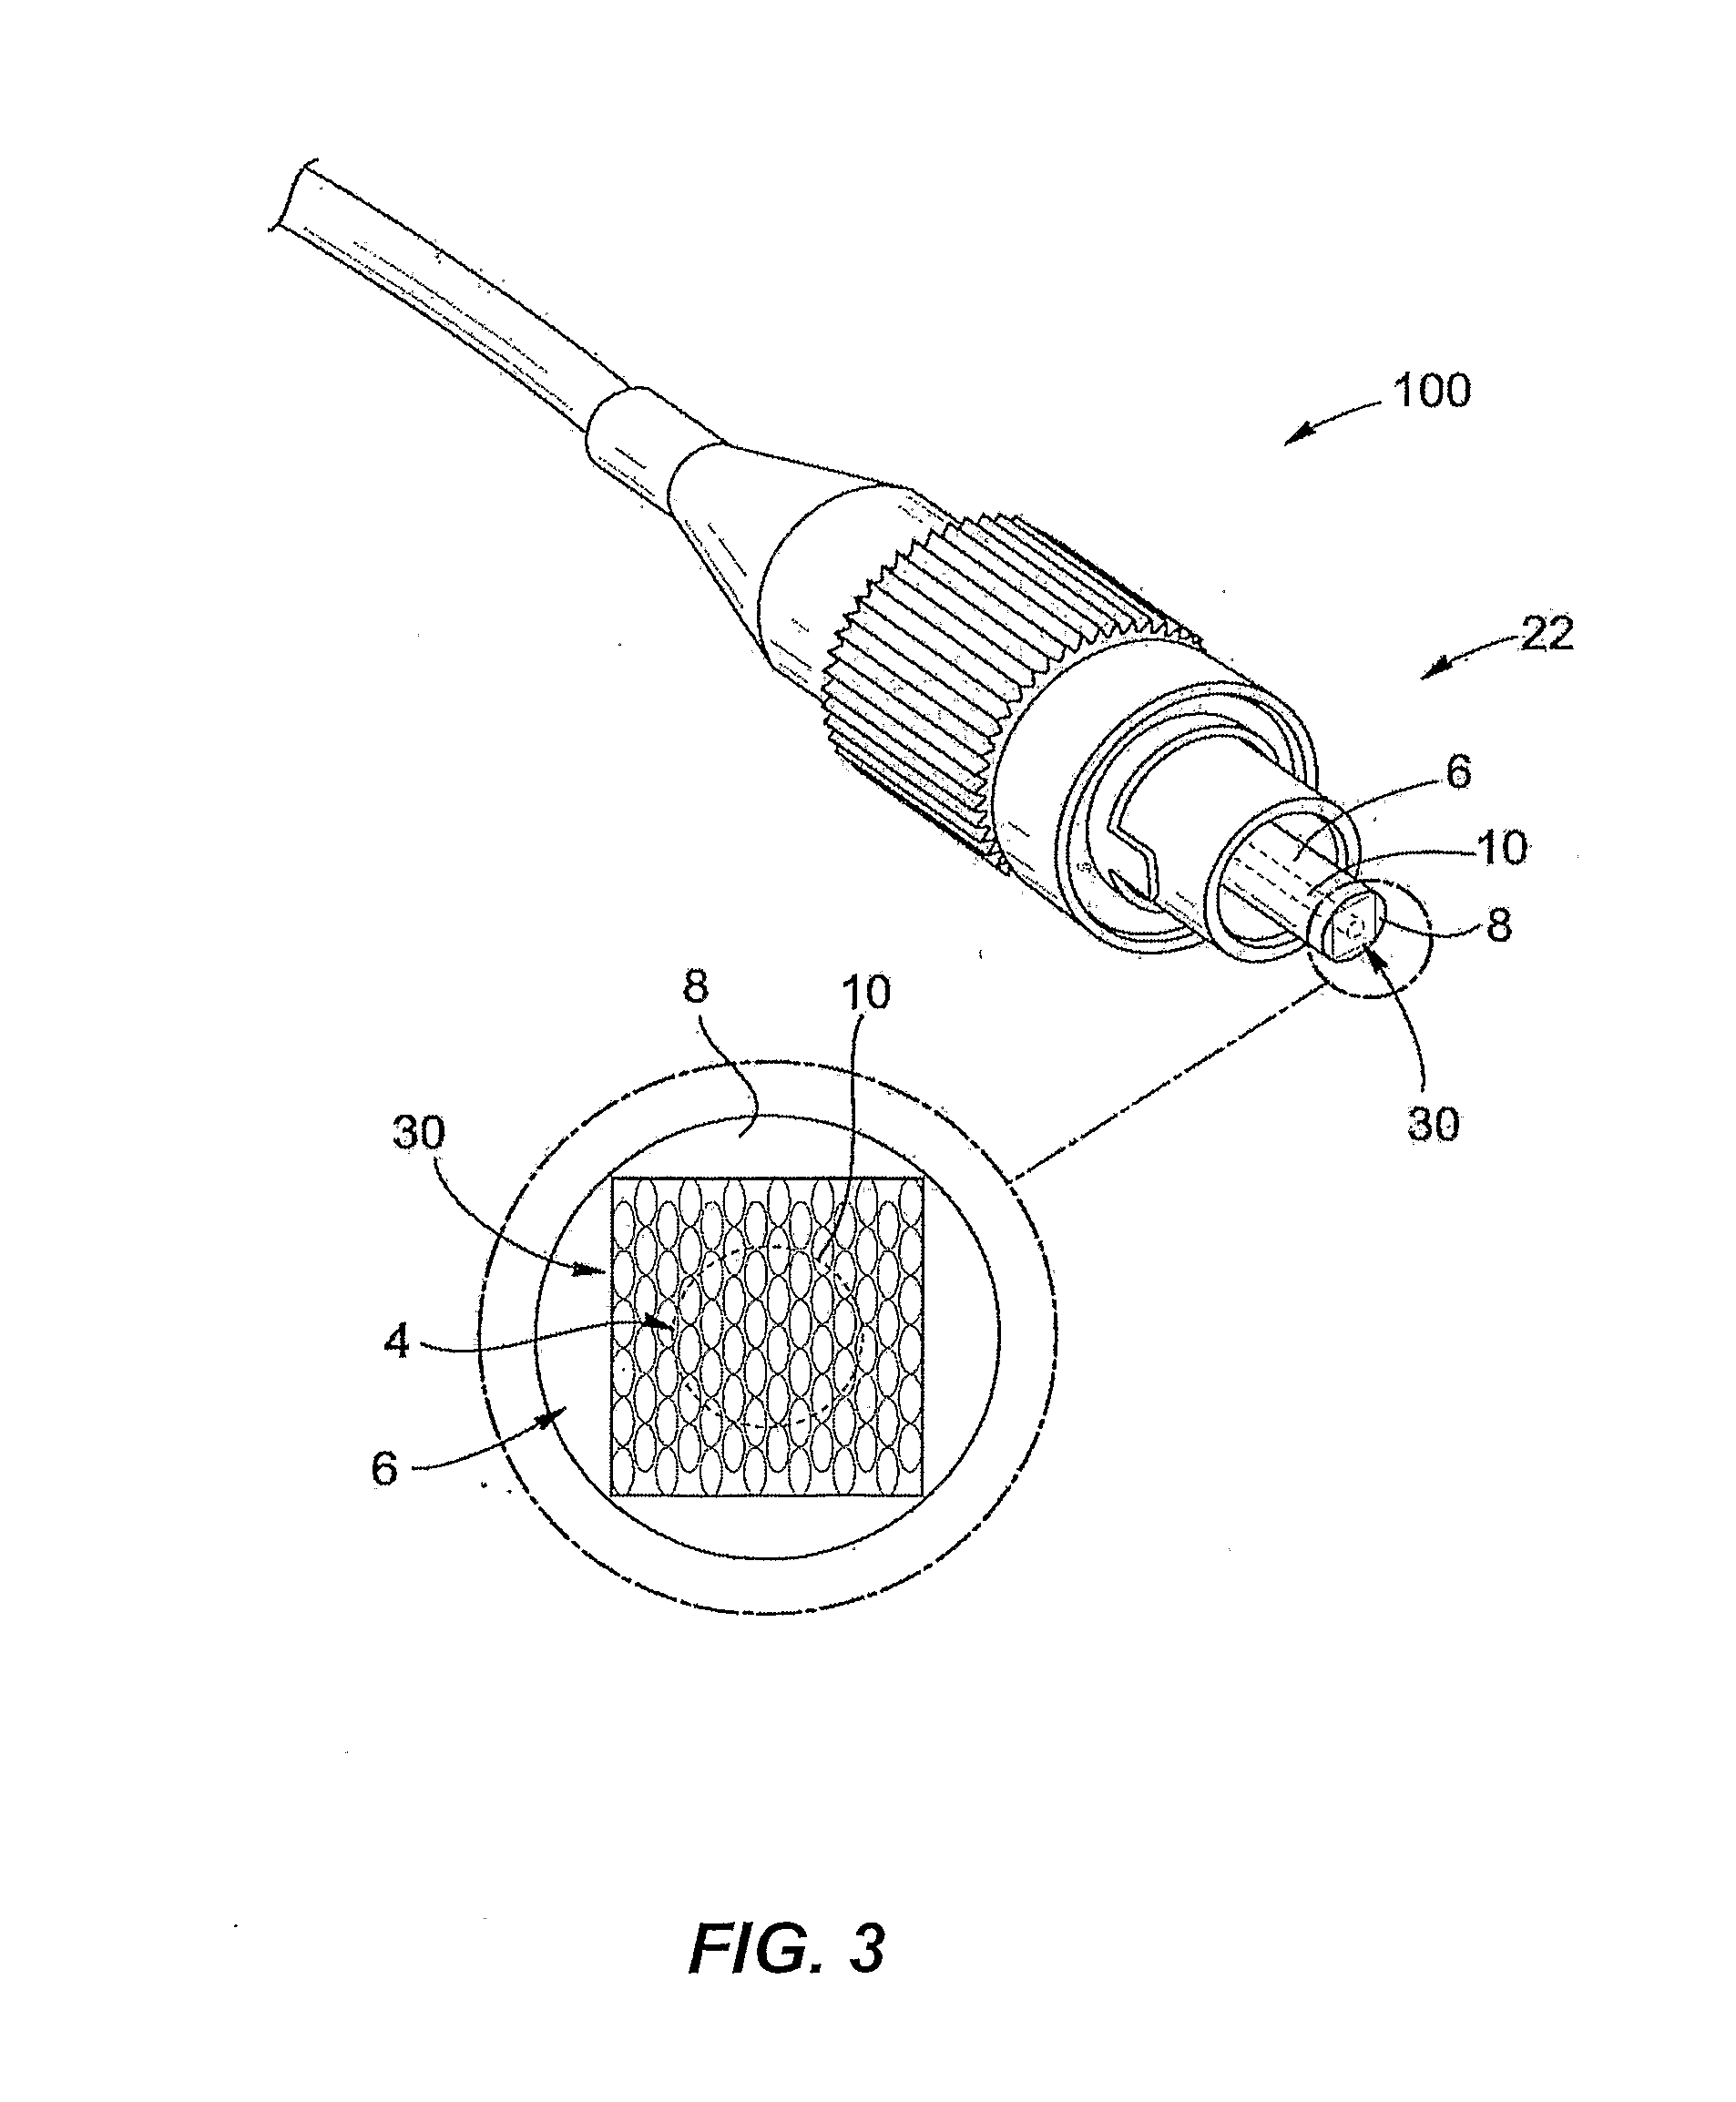 Graphene-based saturable absorber devices and methods